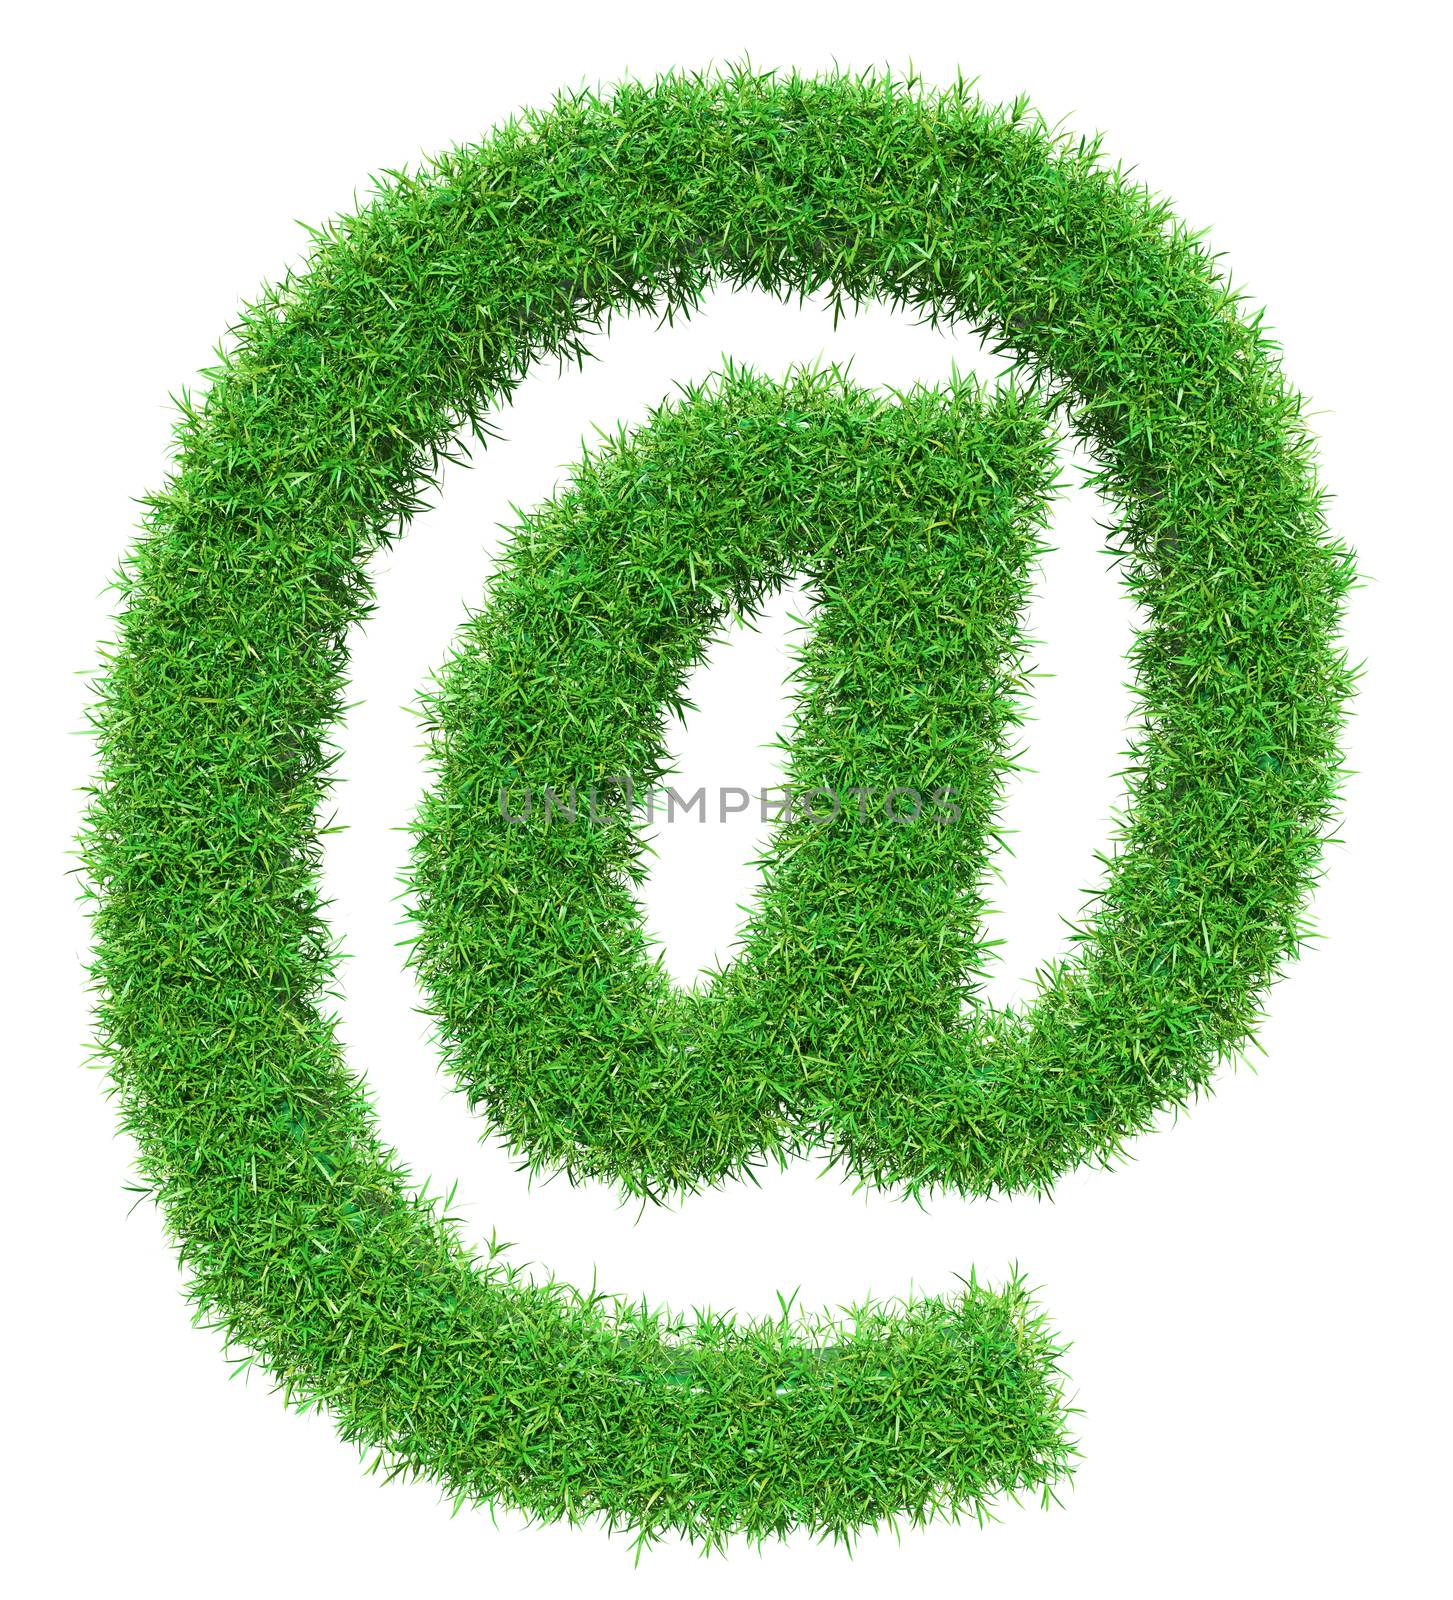 Green grass email symbol, isolated on white background. 3D illustration